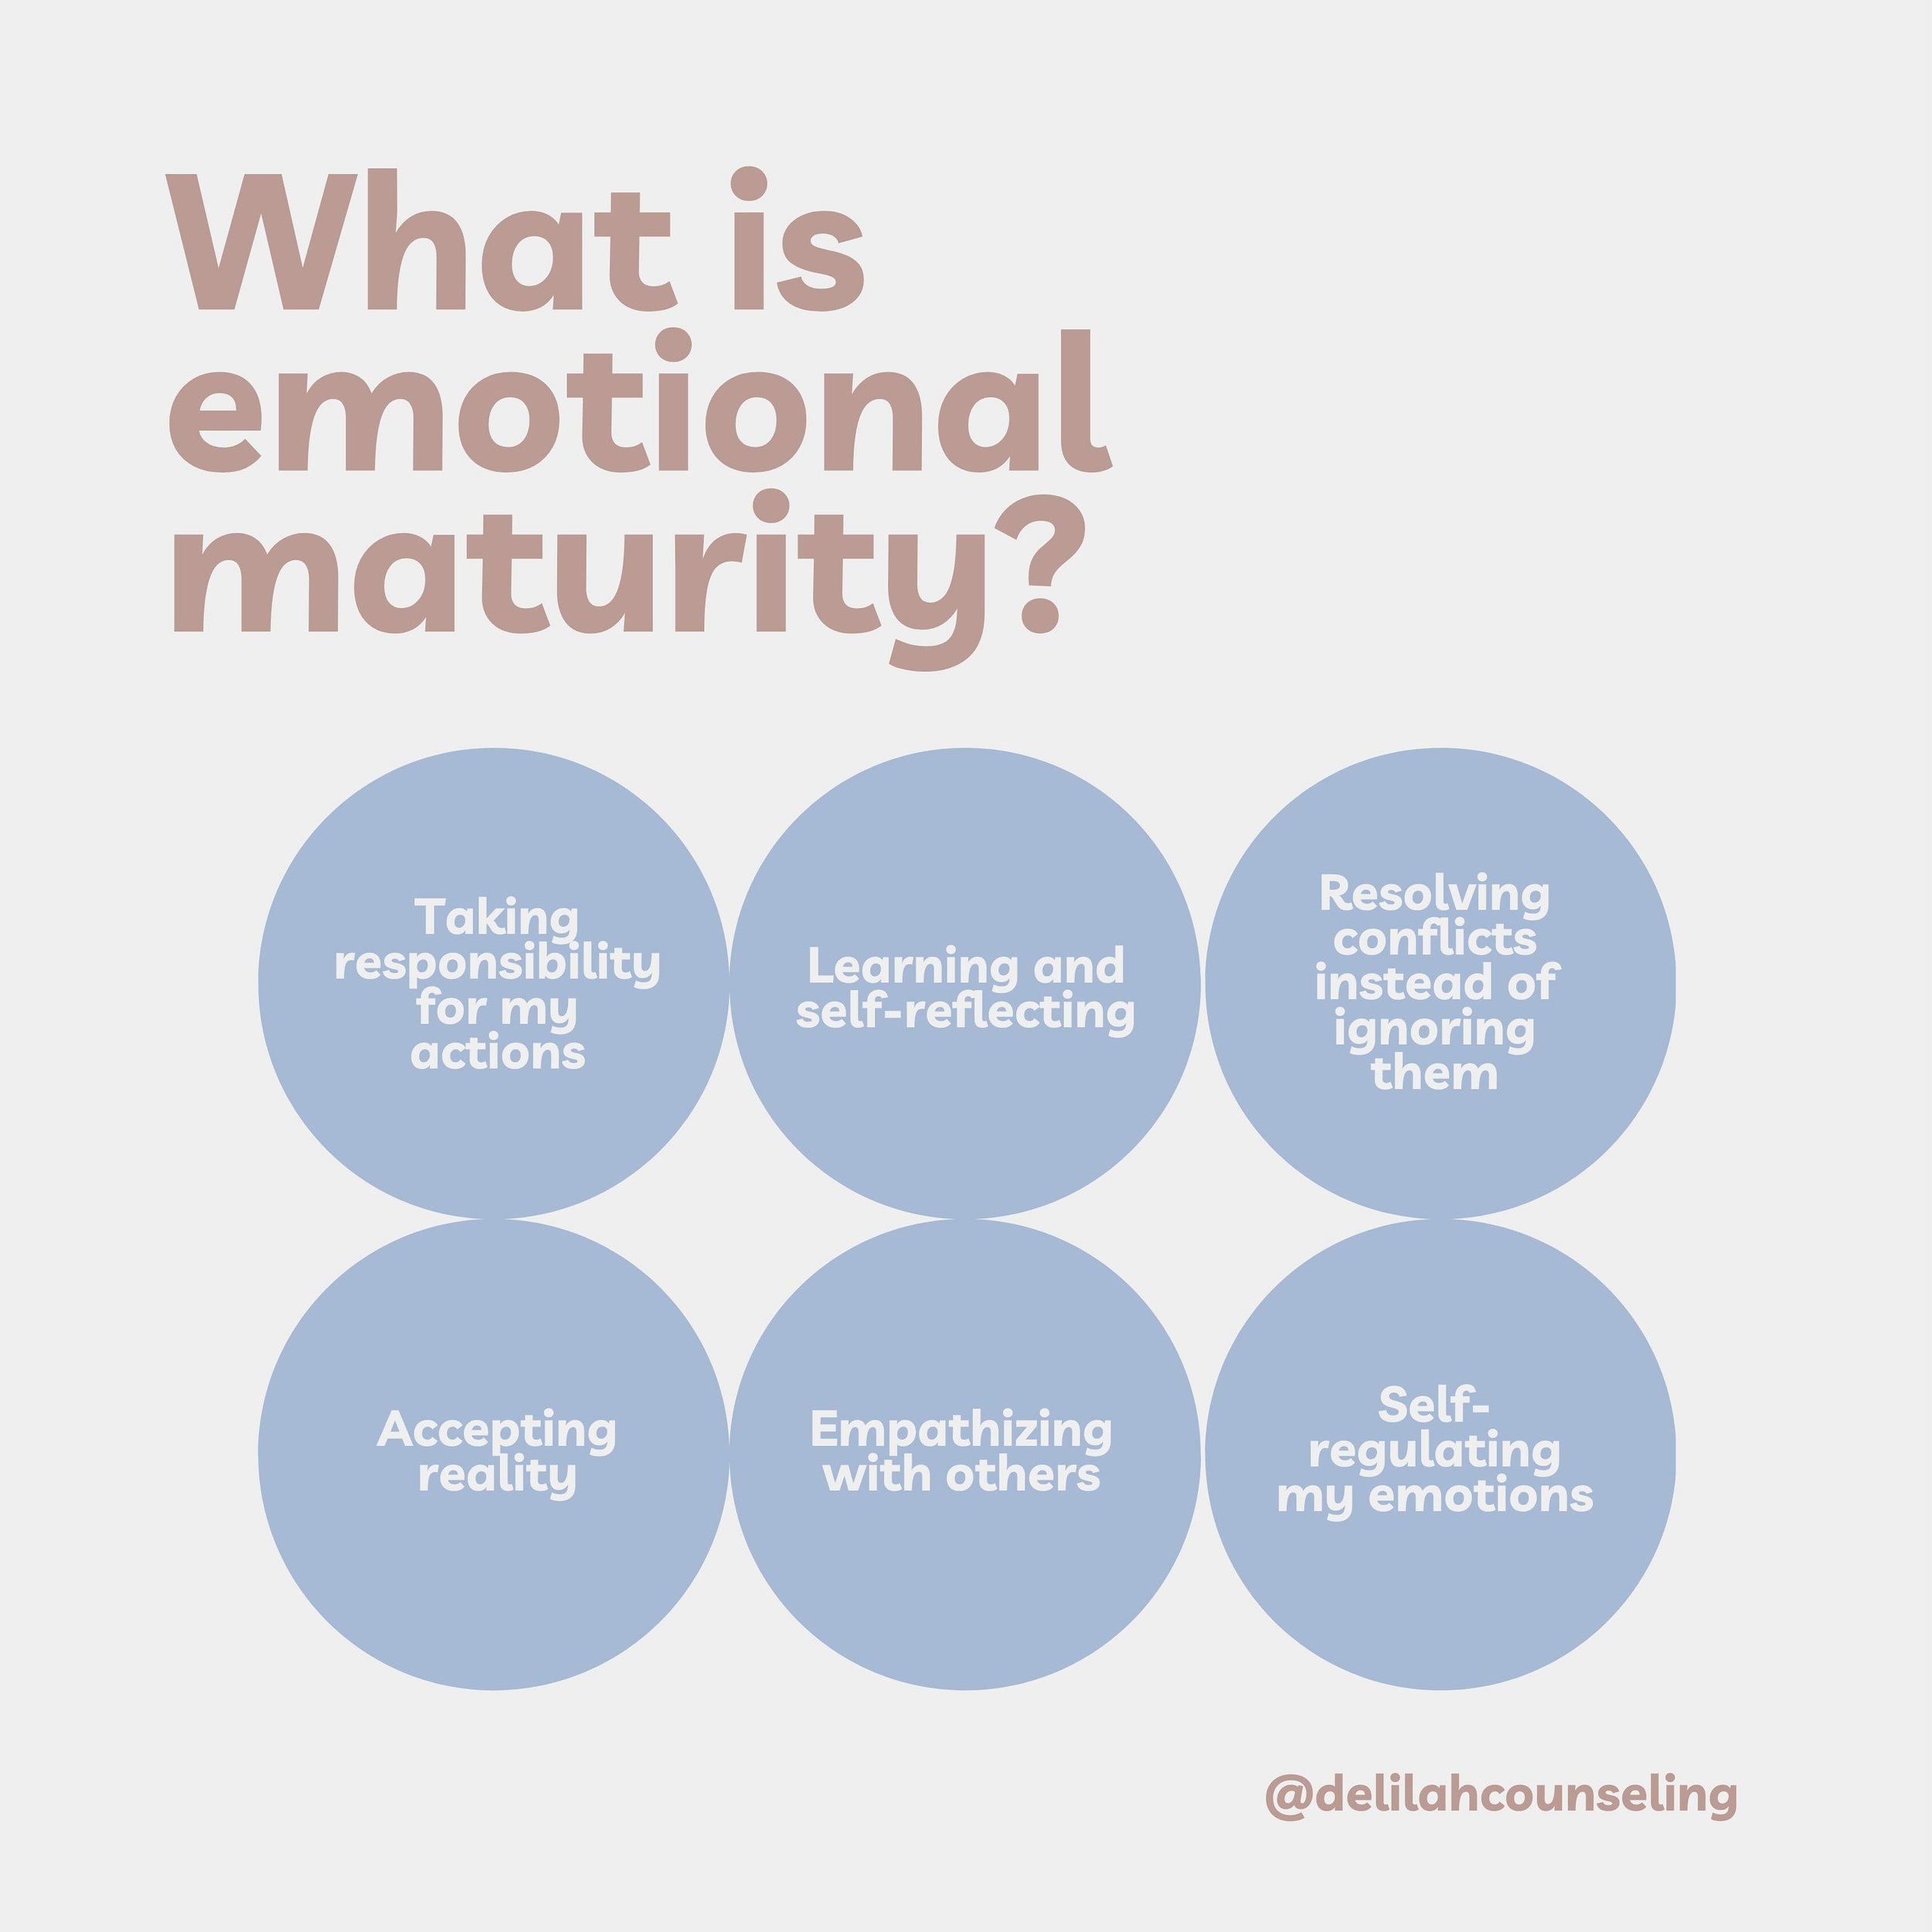 &ldquo;Features of emotional maturity:
&ndash; Taking responsibility for your actions and the consequences they may have
&ndash; Continuing to learn and self-reflect
&ndash; Working through conflict instead of avoiding or ignoring it
&ndash; Acceptin